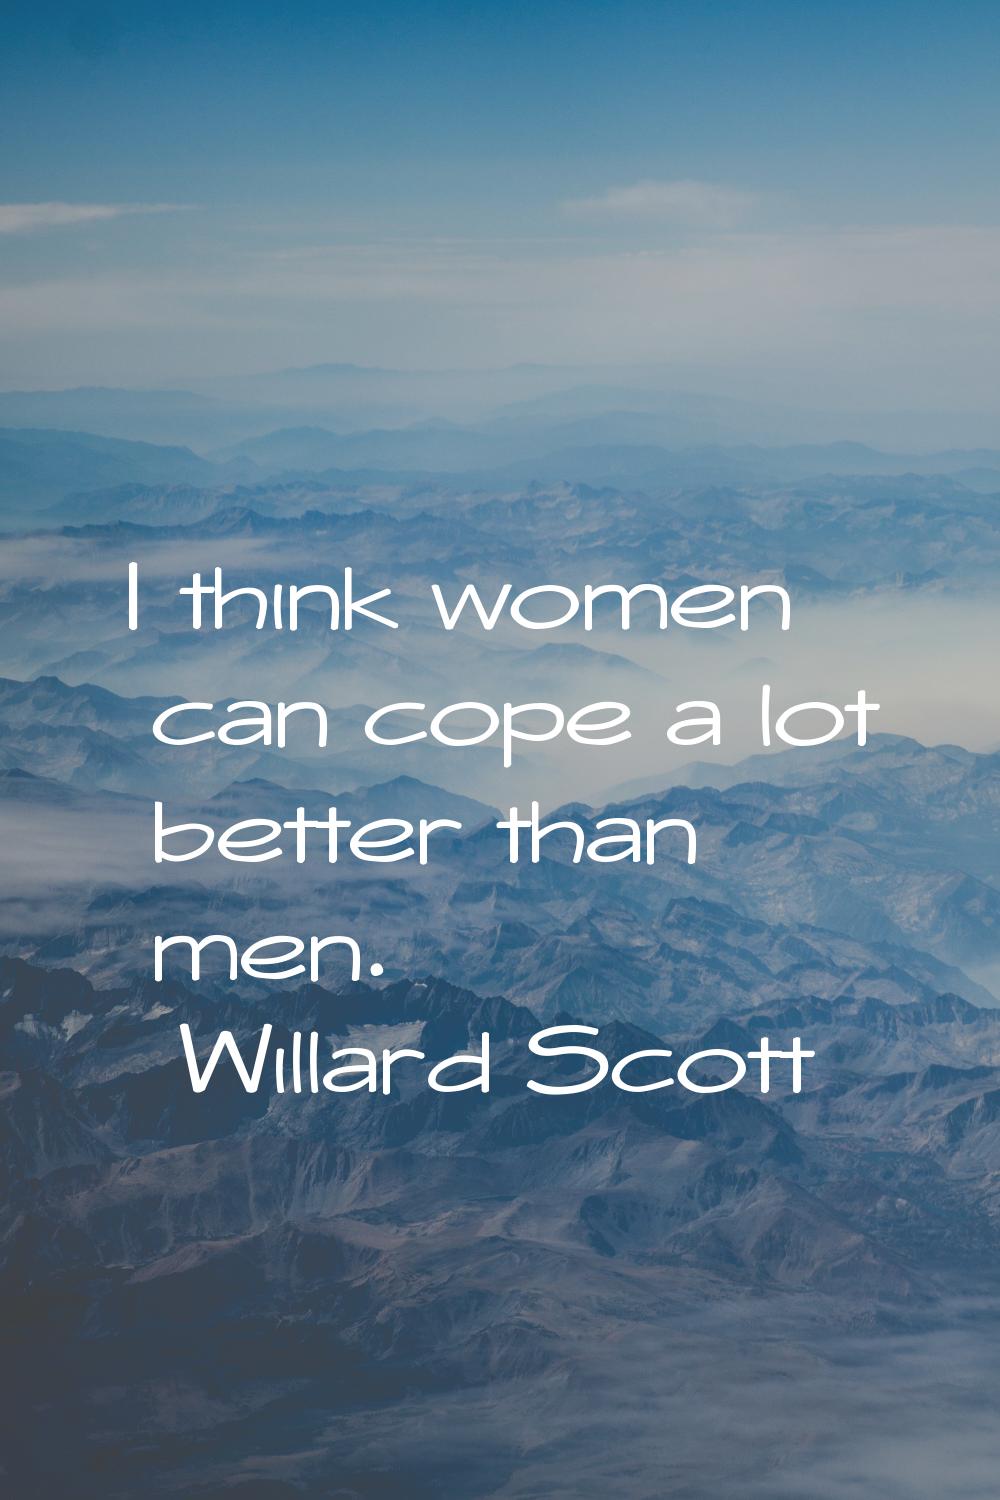 I think women can cope a lot better than men.